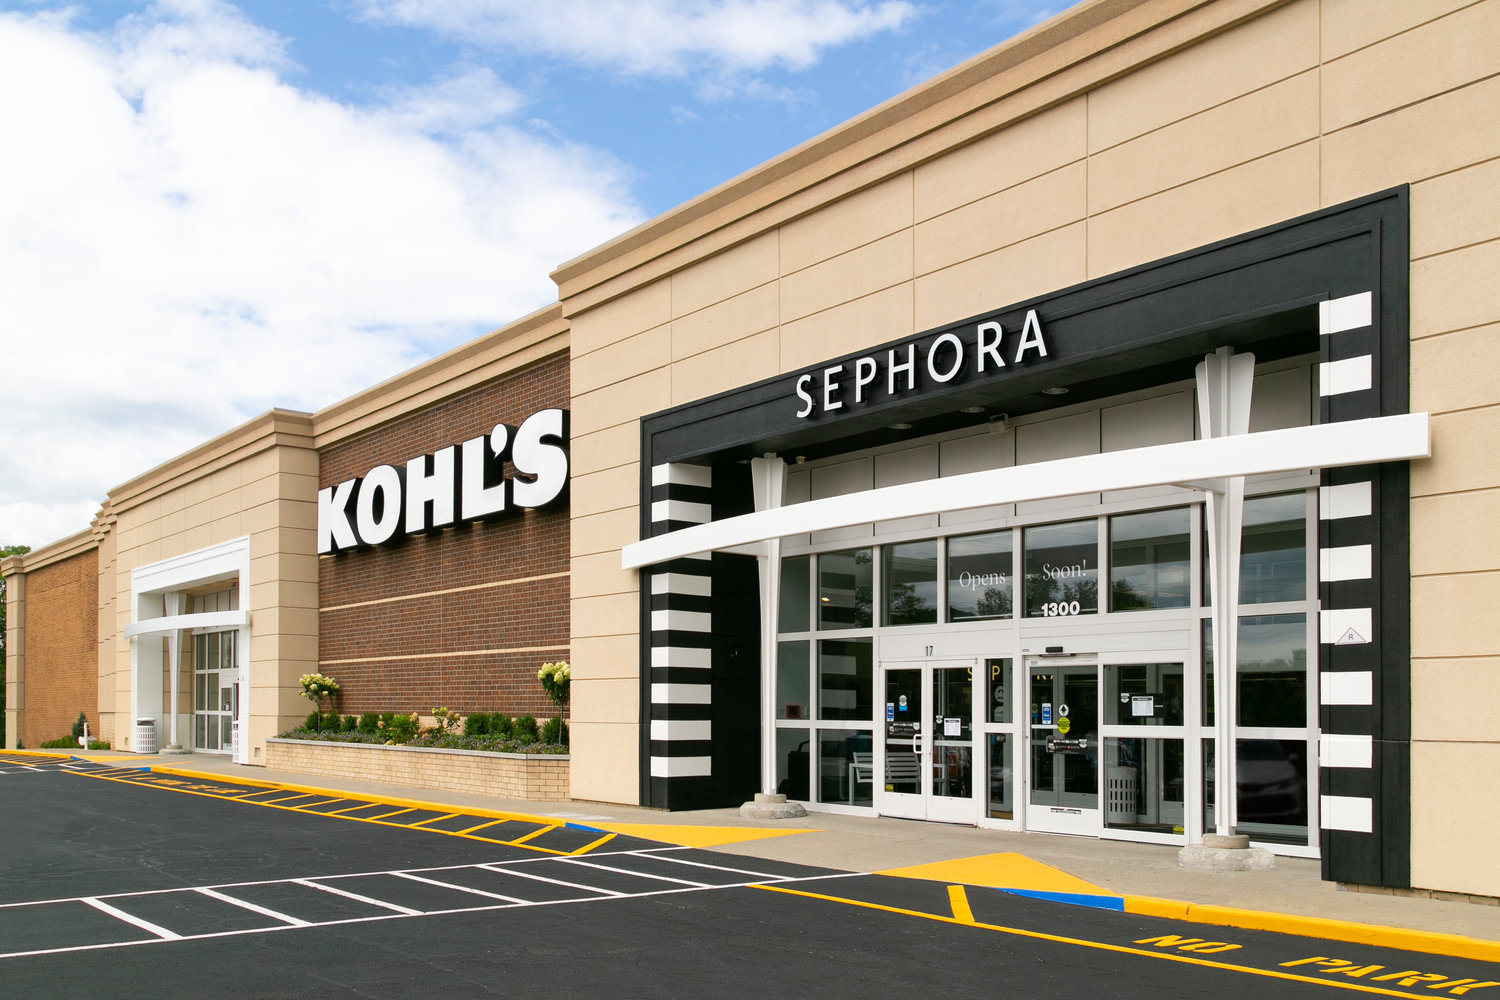 Sephora at Kohl’s features a 2,500 square foot, fully immersive beauty experience that mimics the look and feel of a freestanding Sephora.